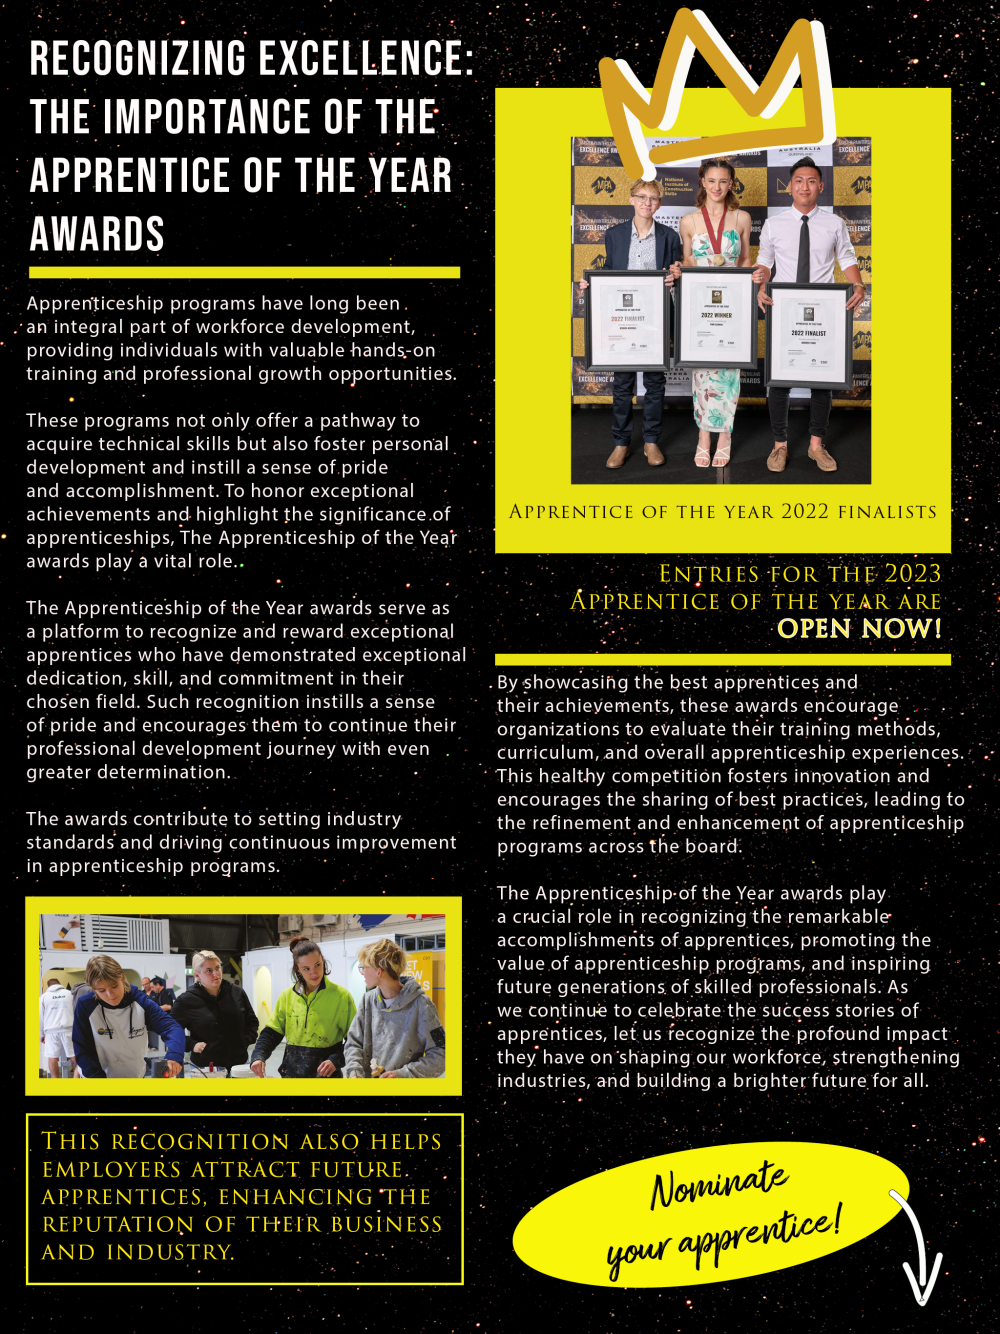 Recognizing Excellence: the importance of the Apprentice of the year awards.